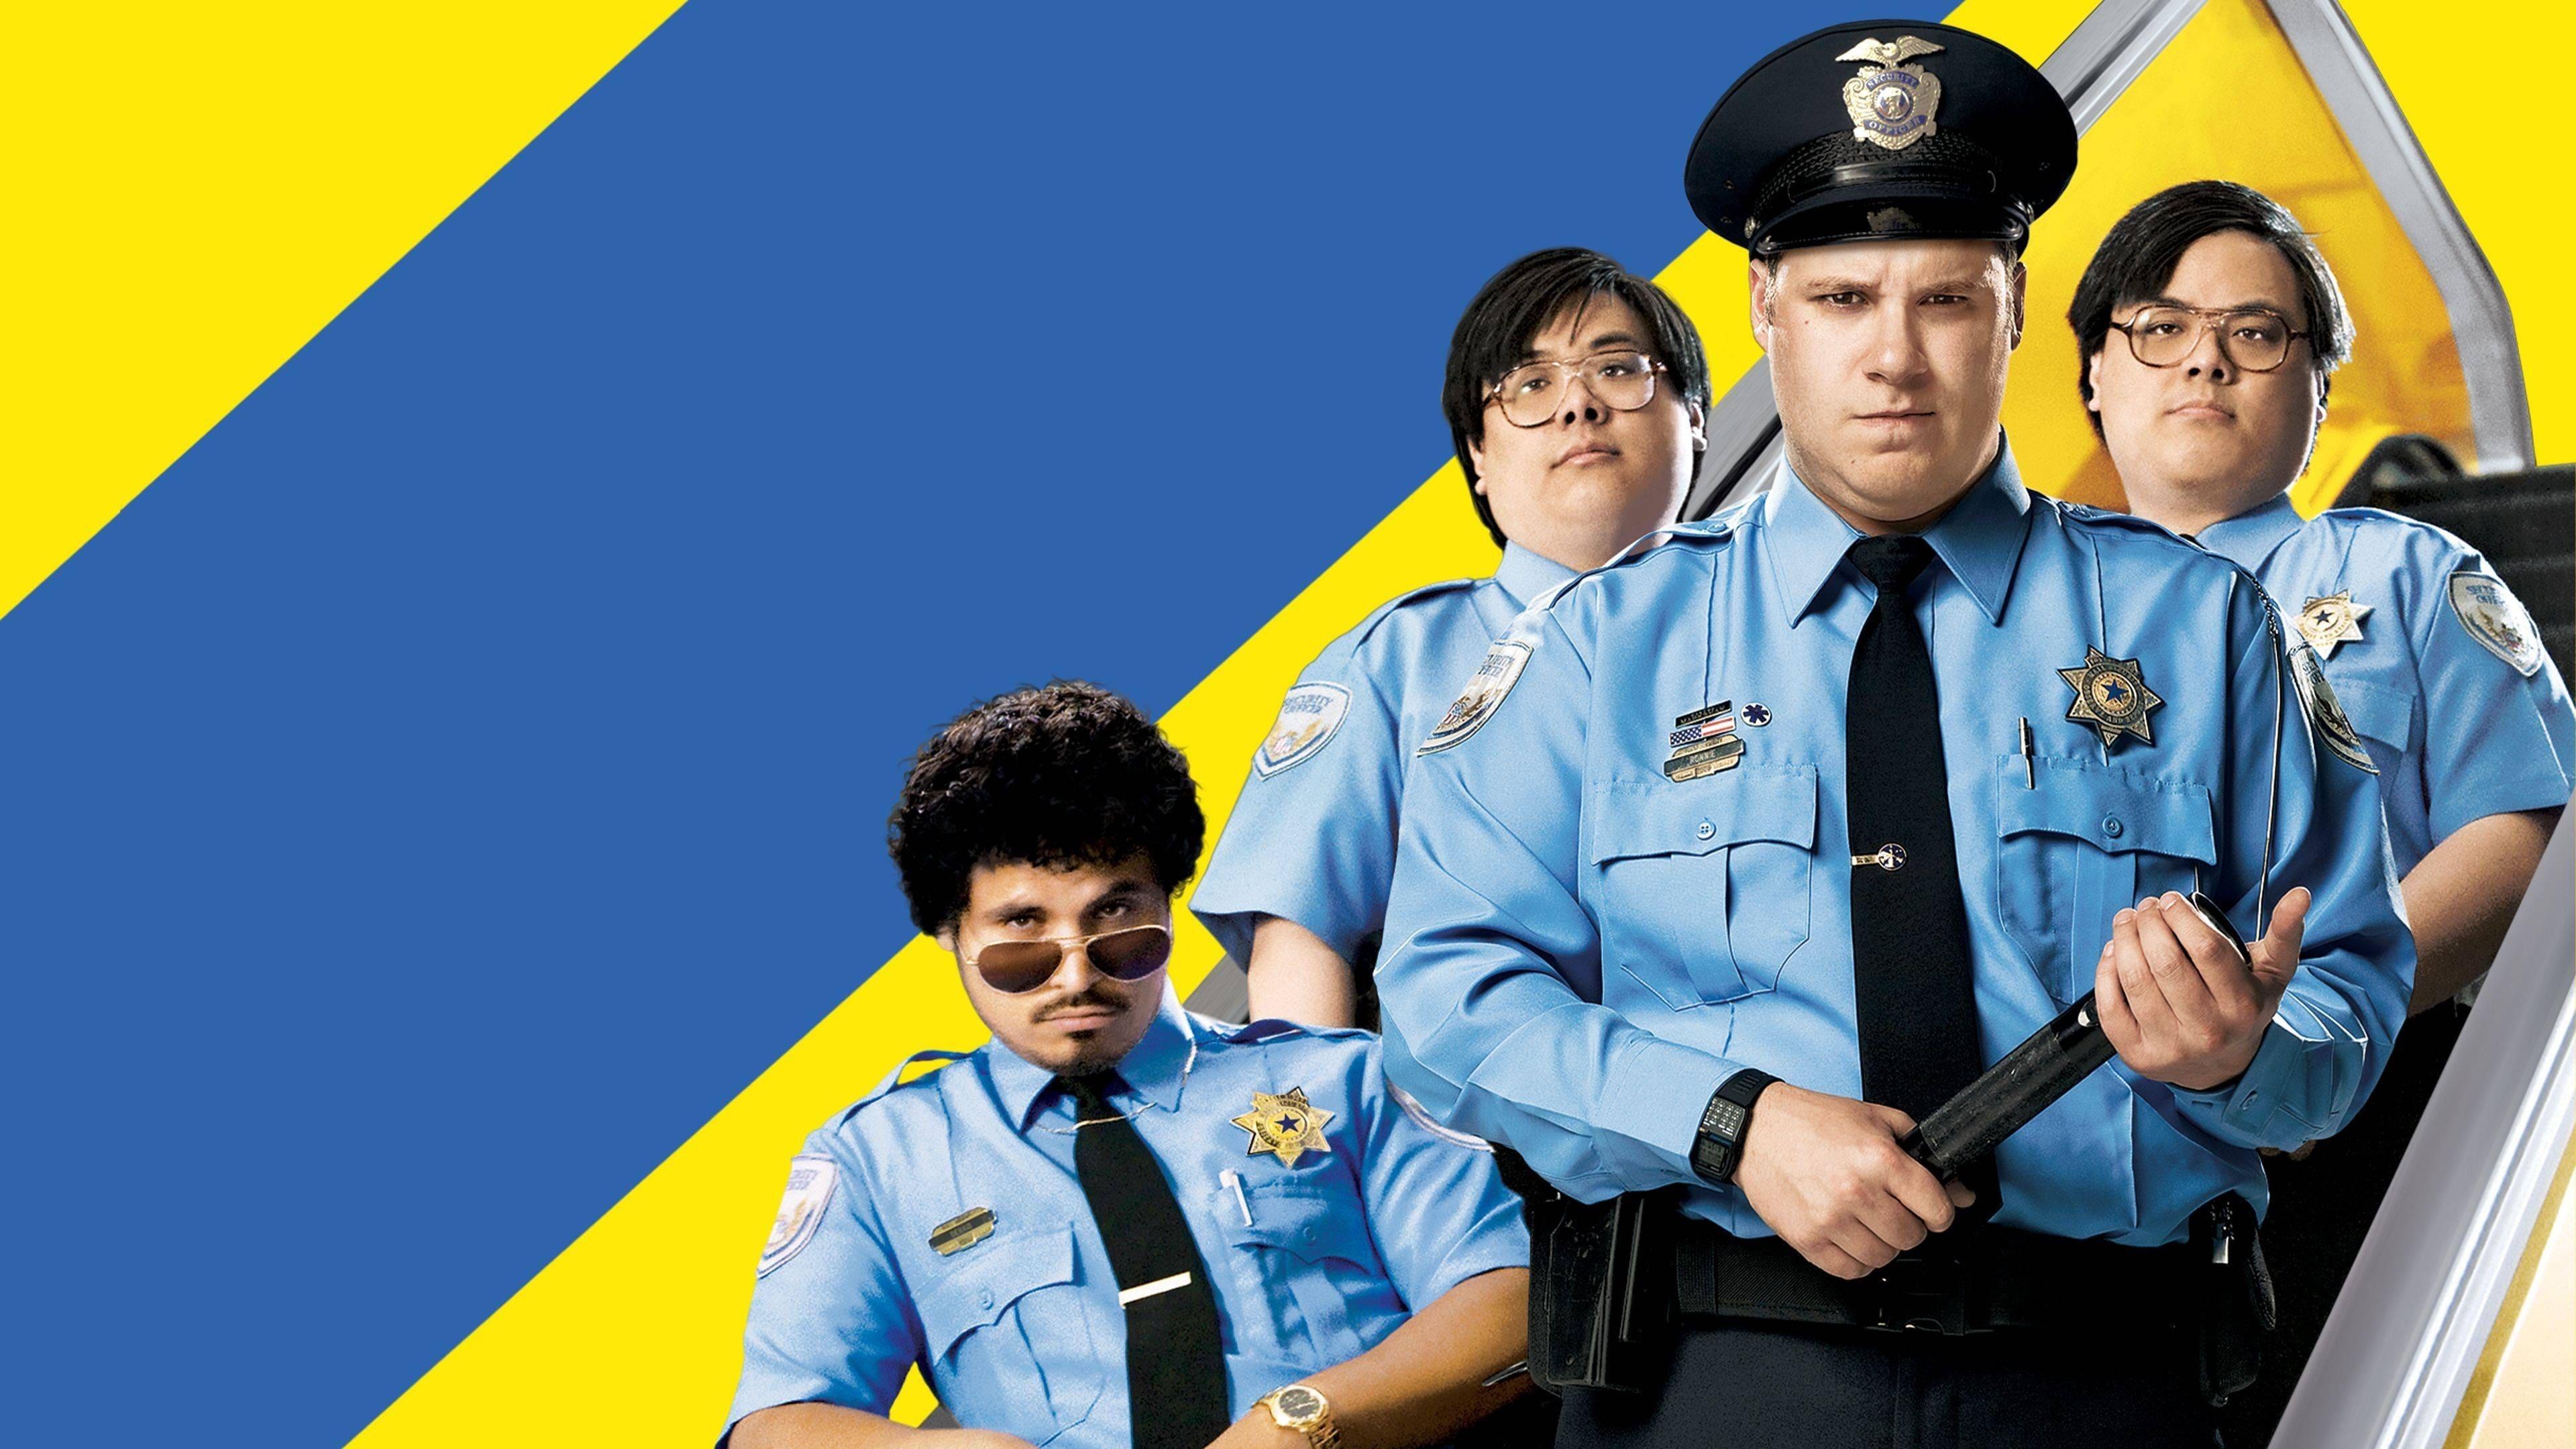 Observe and Report backdrop